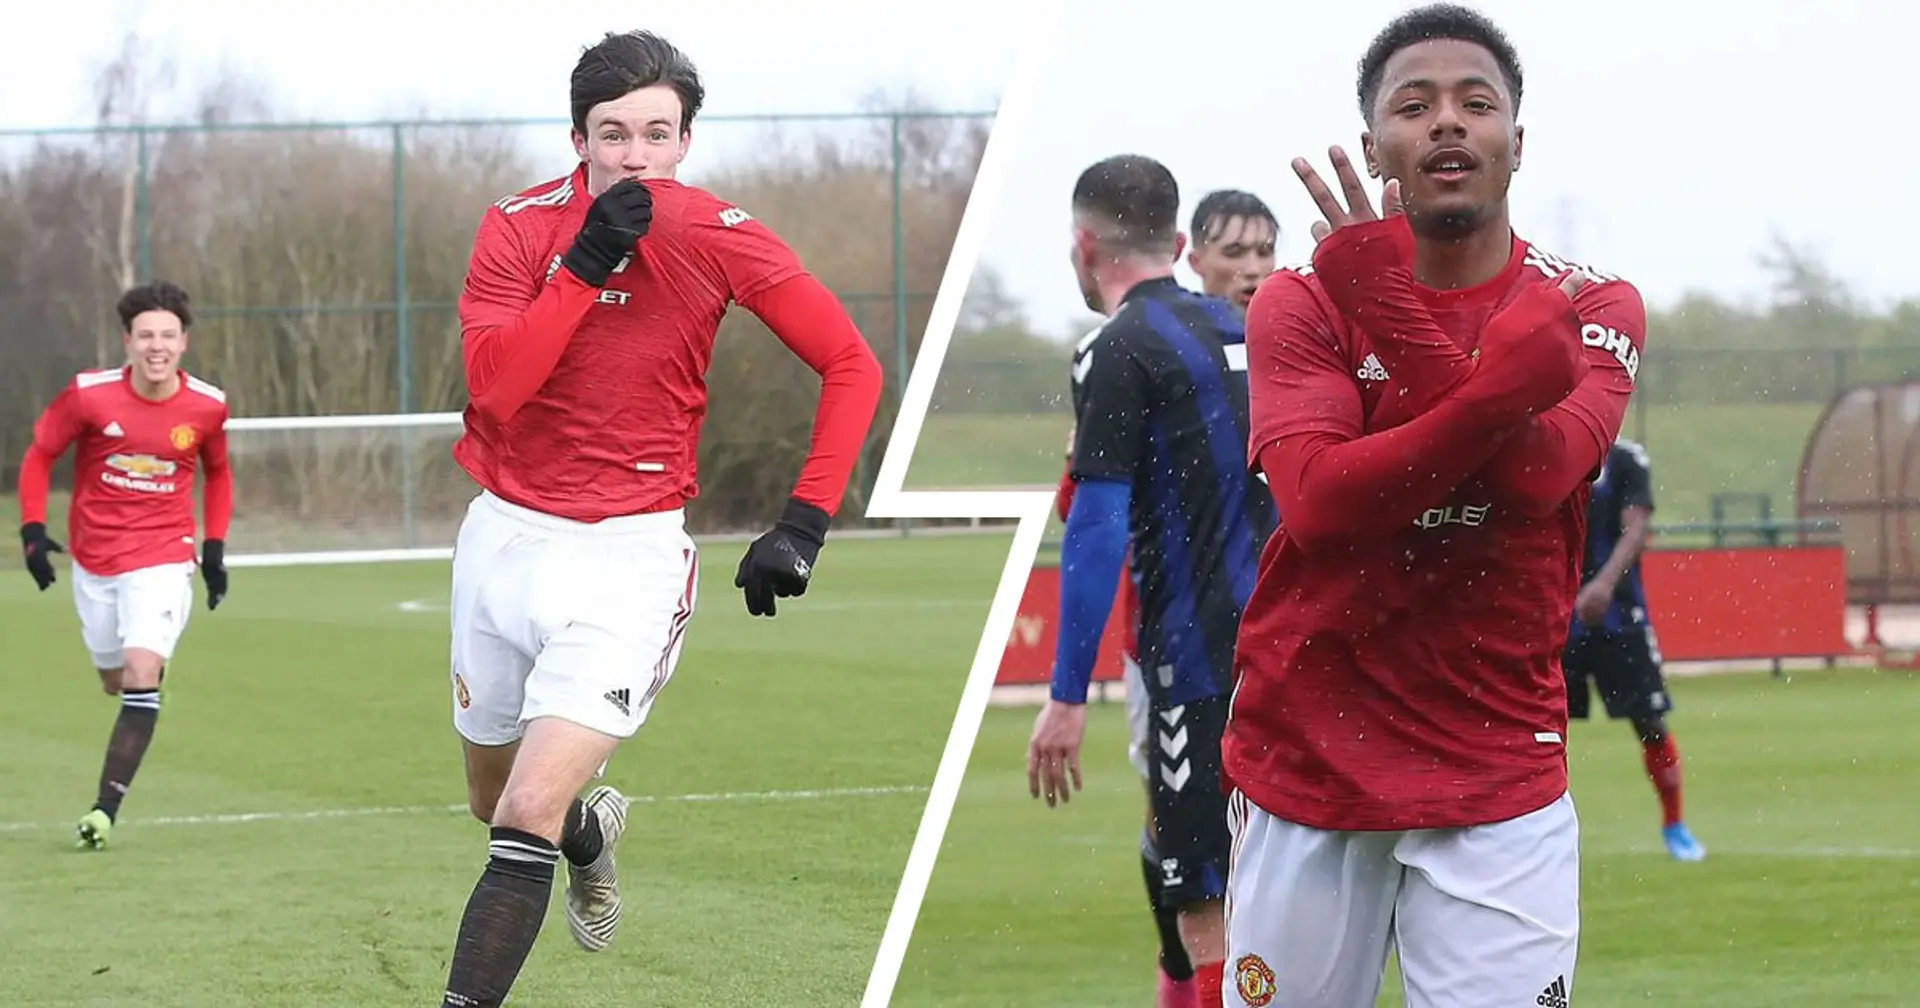 Man United U18 finish league season with massive 8-1 win - could become North division champions if Man City drop points